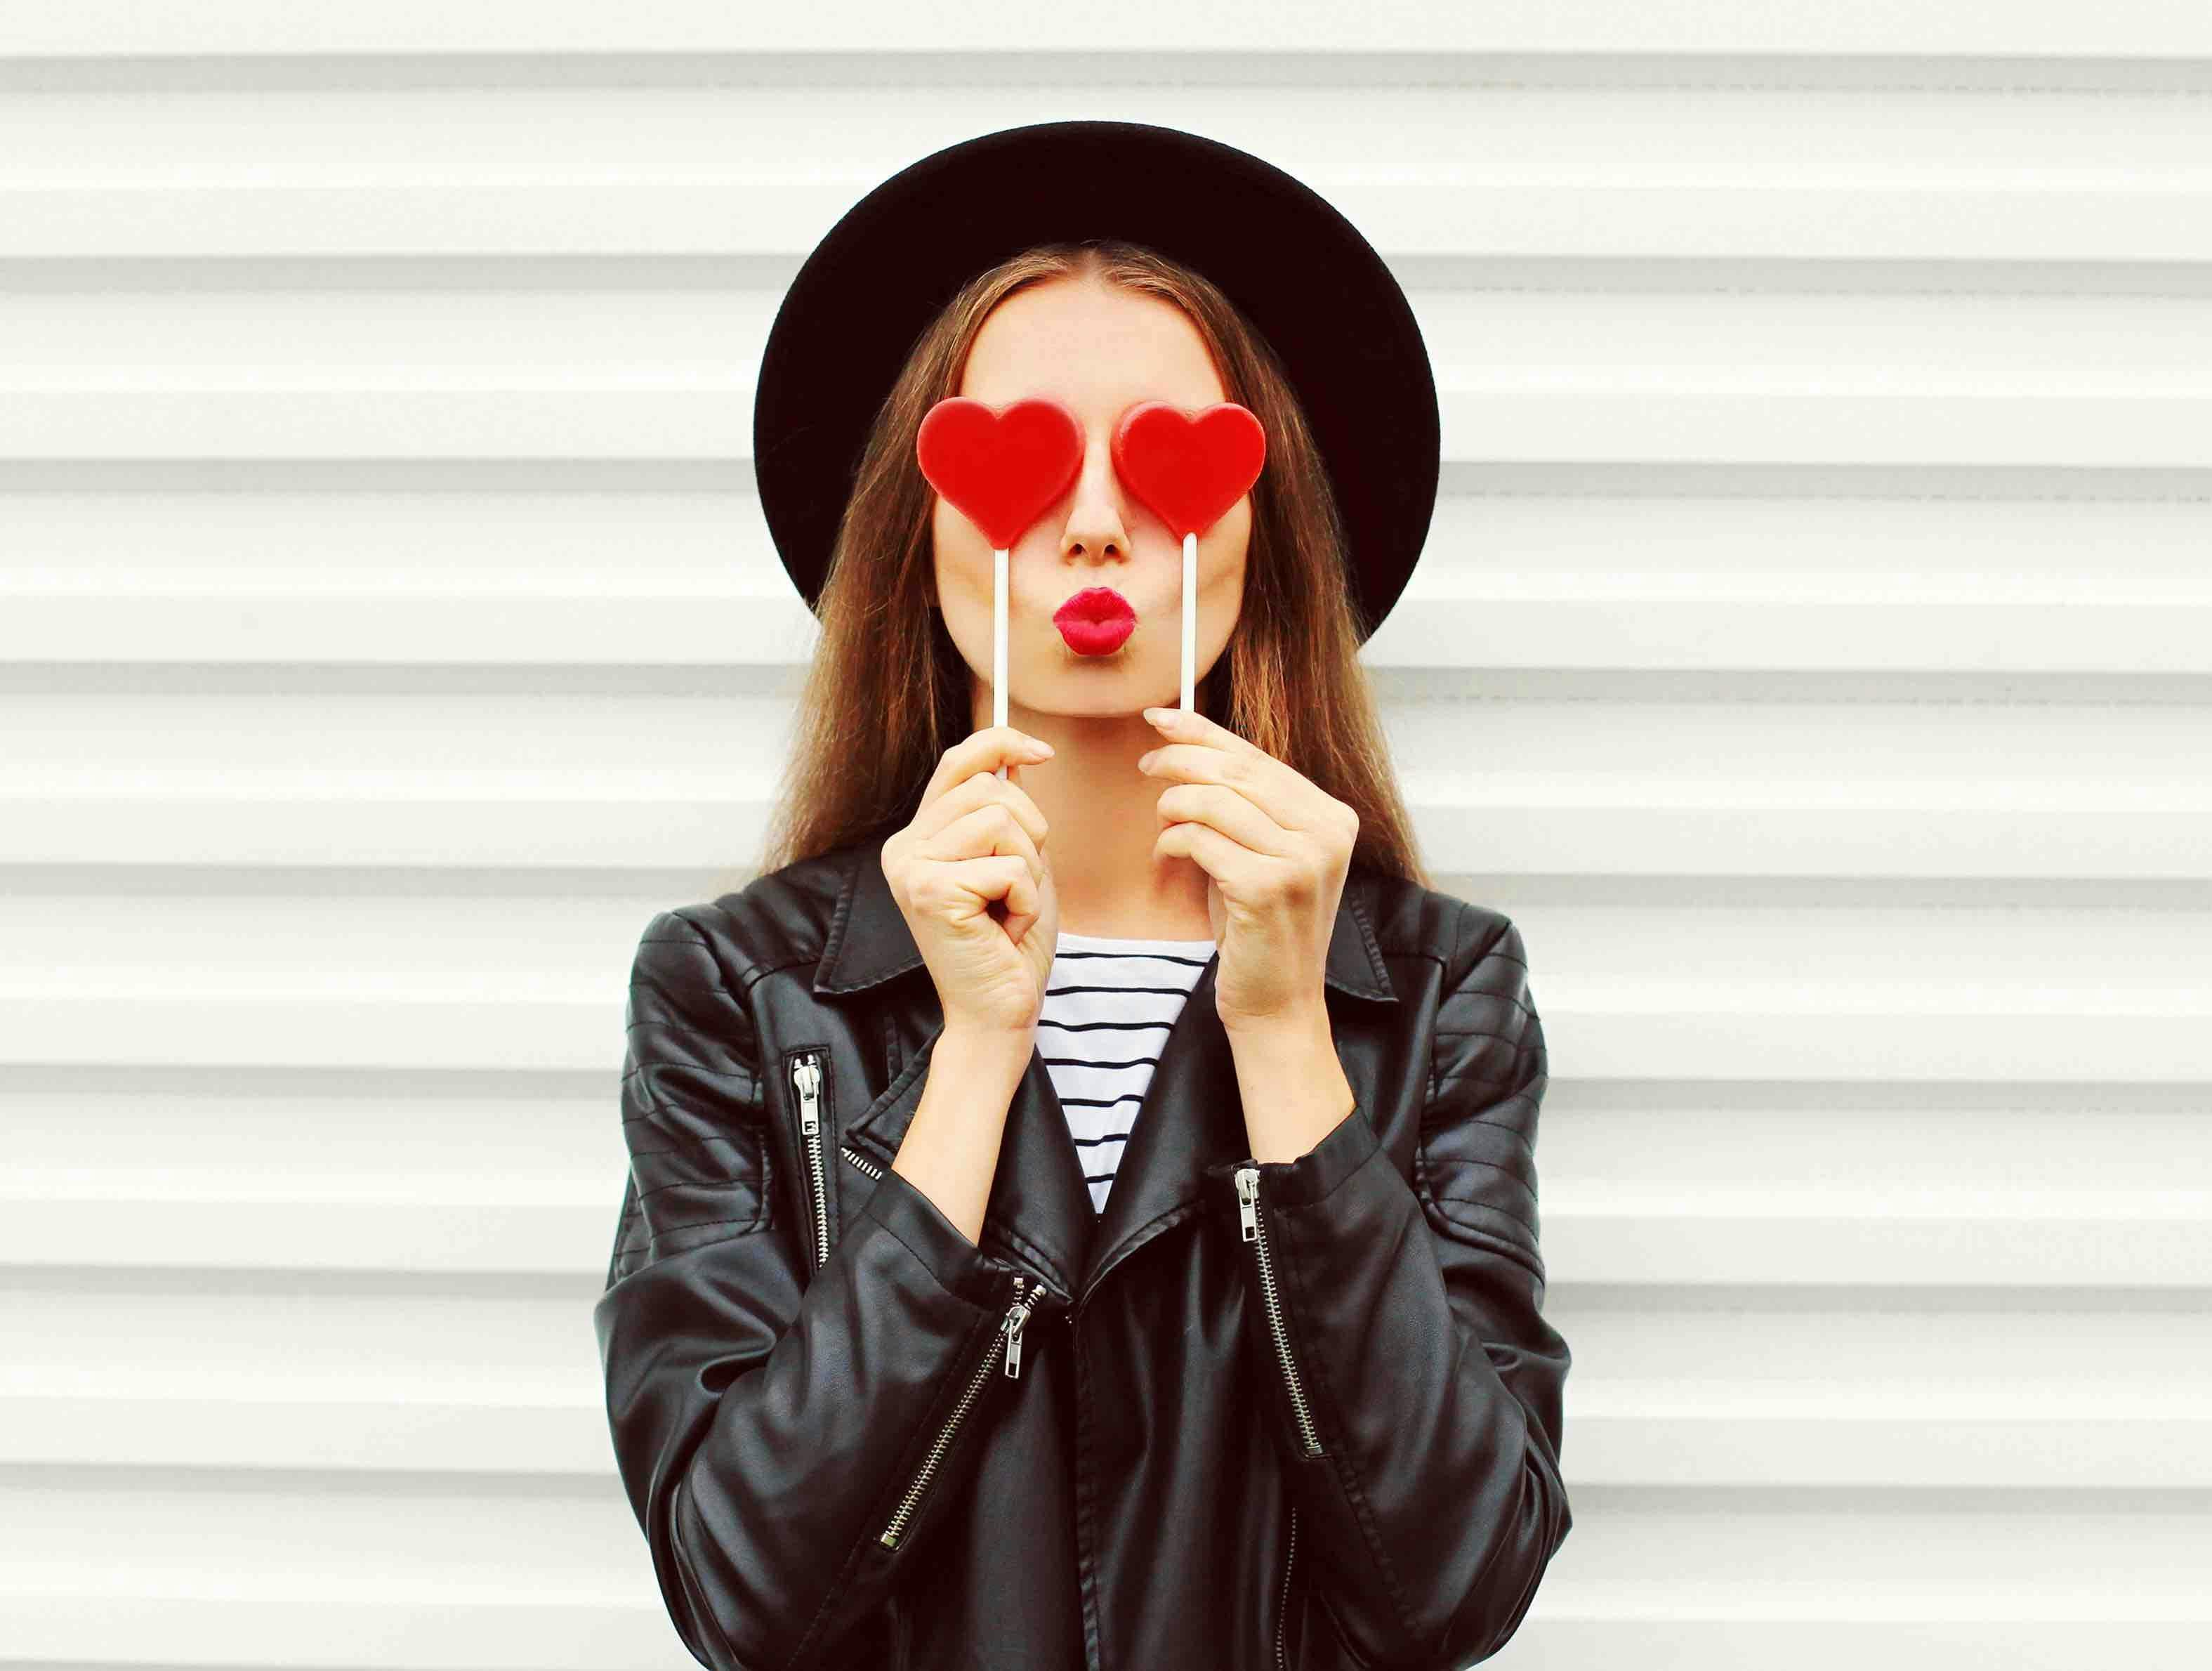 makeup,hands,caucasian,happy,kiss,youth,red,beautiful,trendy,model,female,day,valentines day,sunglasses,cheerful,girl,heart,blowing,person,style,love,woman,color,feminine,young,shaped,lollipop,lipstick,cute,eyes,summer,glasses,holding,modern,valentines,heart shaped,teenager,lovely,pretty,carefree,cool,portrait,stylish,face,lips,sweet,feelings,fun,posing,fashion coat jacket adult female person woman face head photography portrait